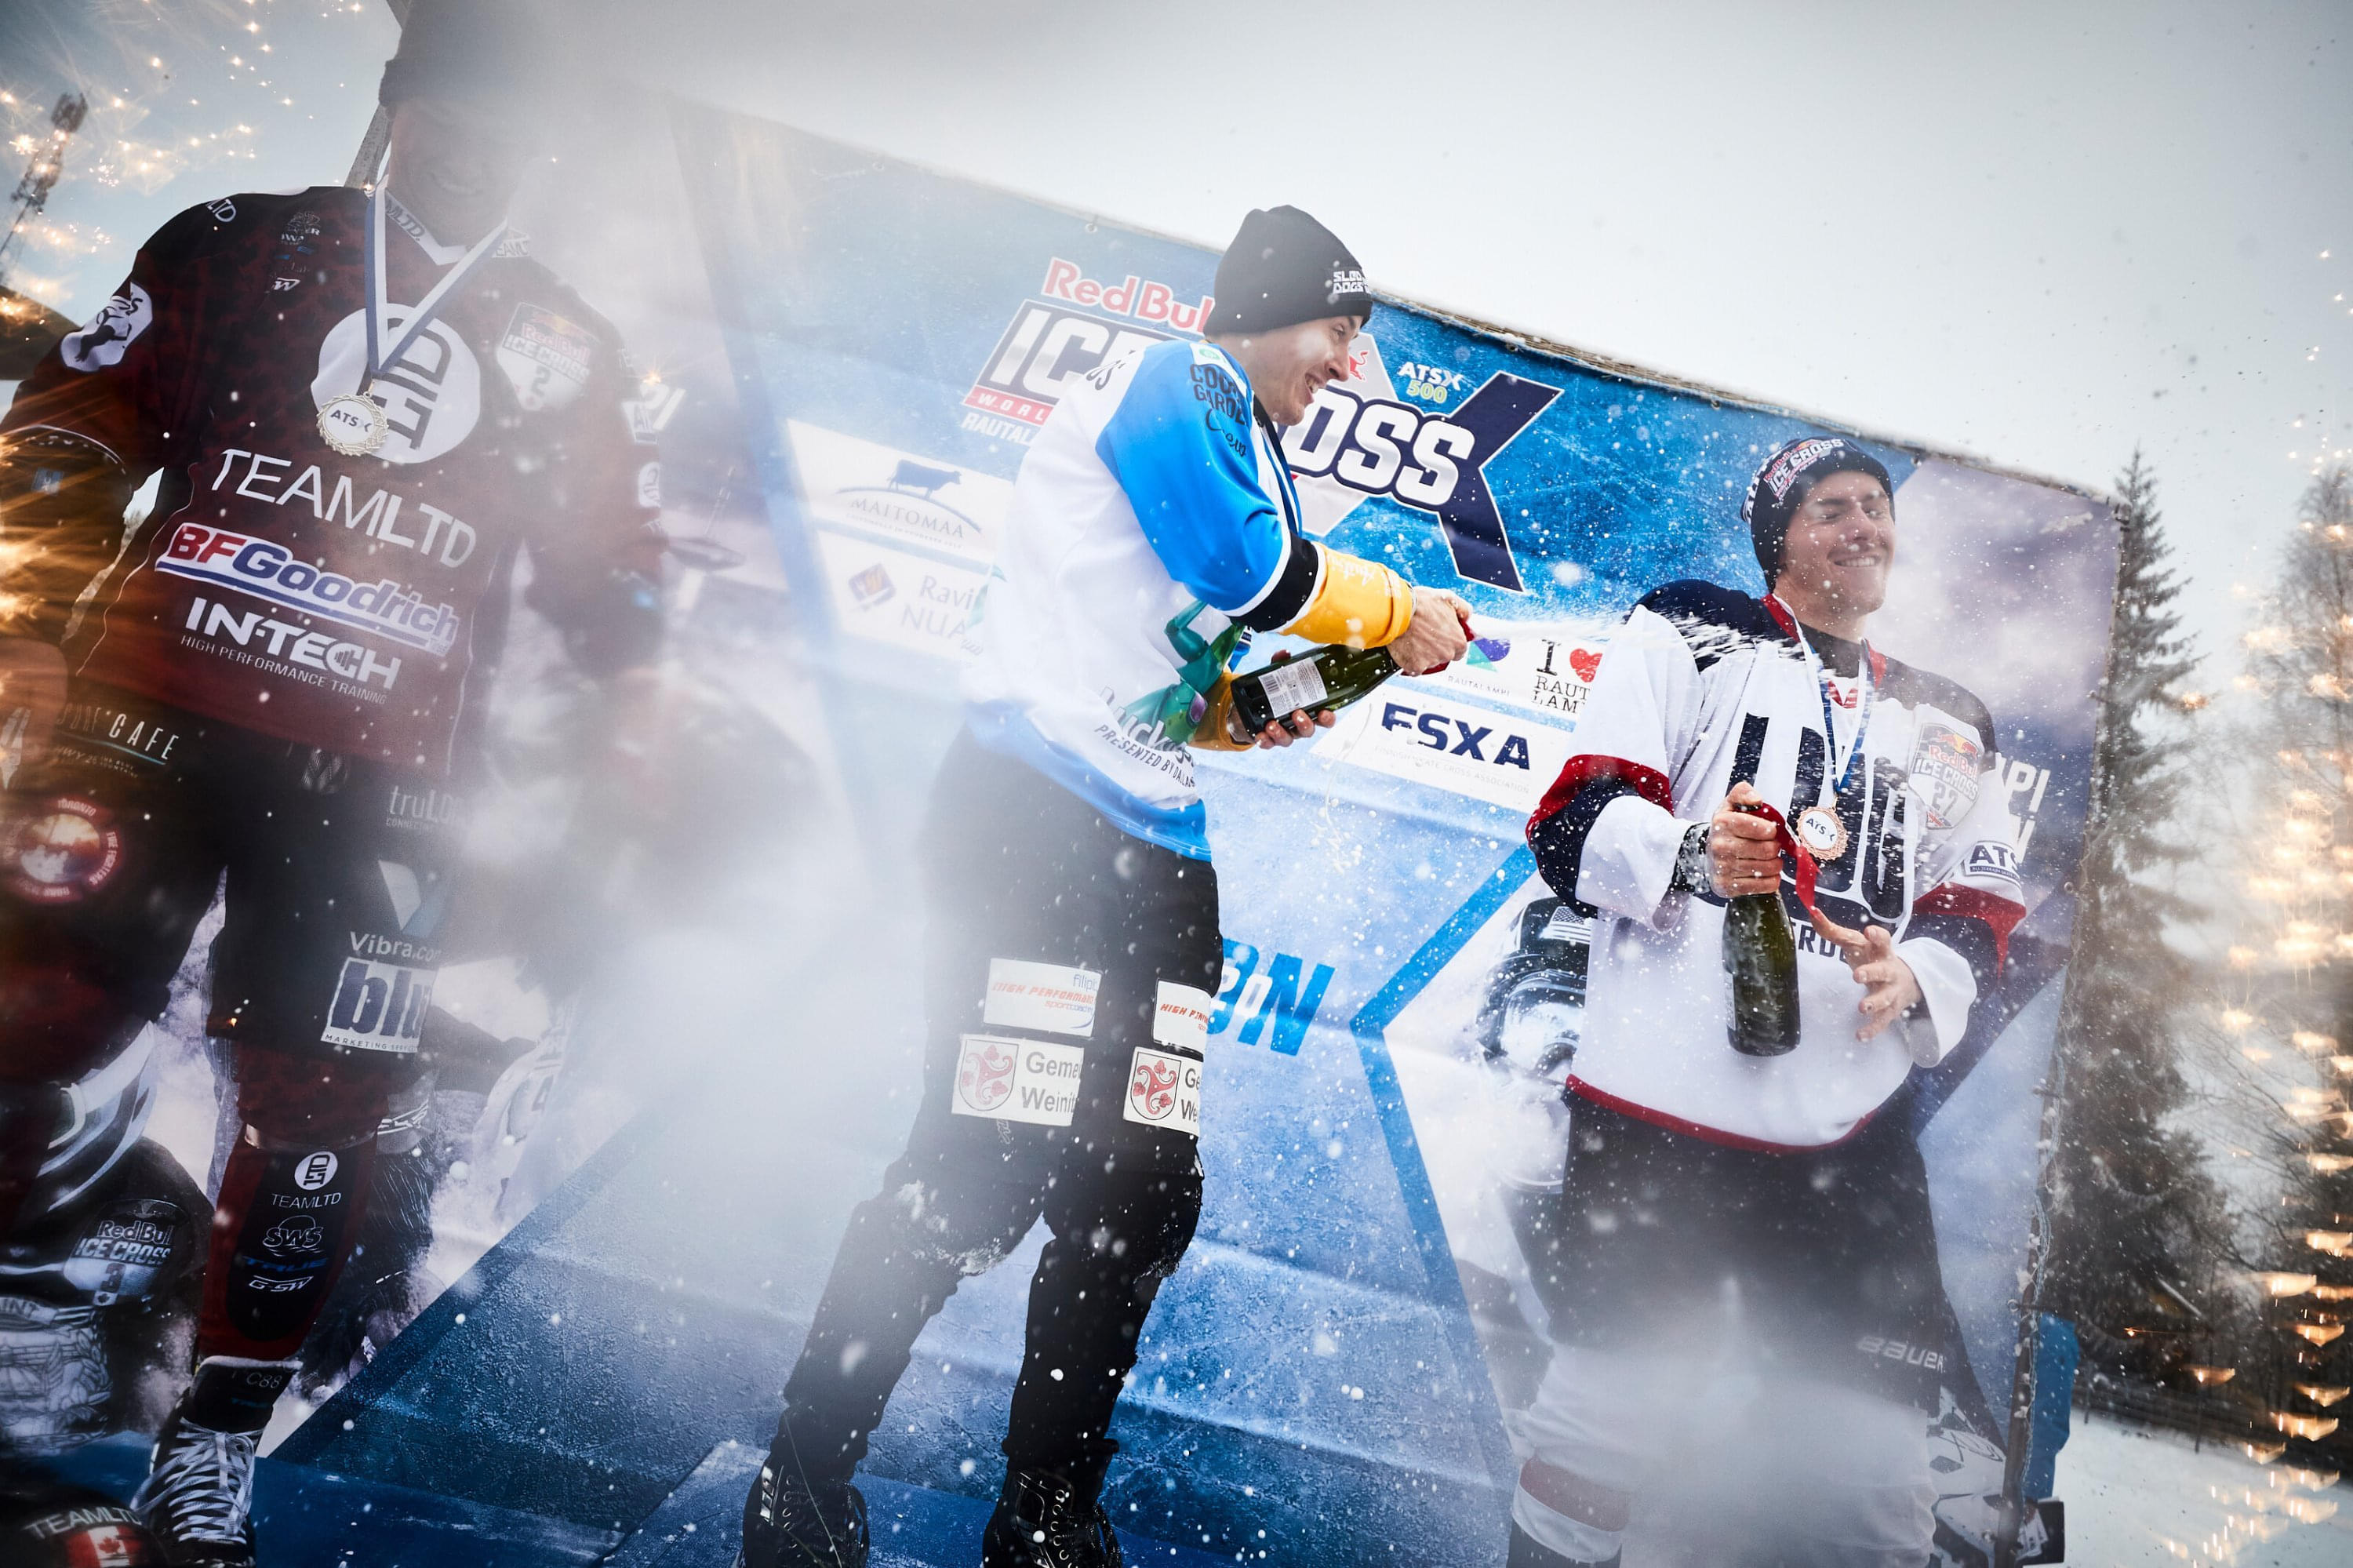 Robin came third in Finland last weekend, his best result yet. Image: Andreas Langreiter / Red Bull Content Pool